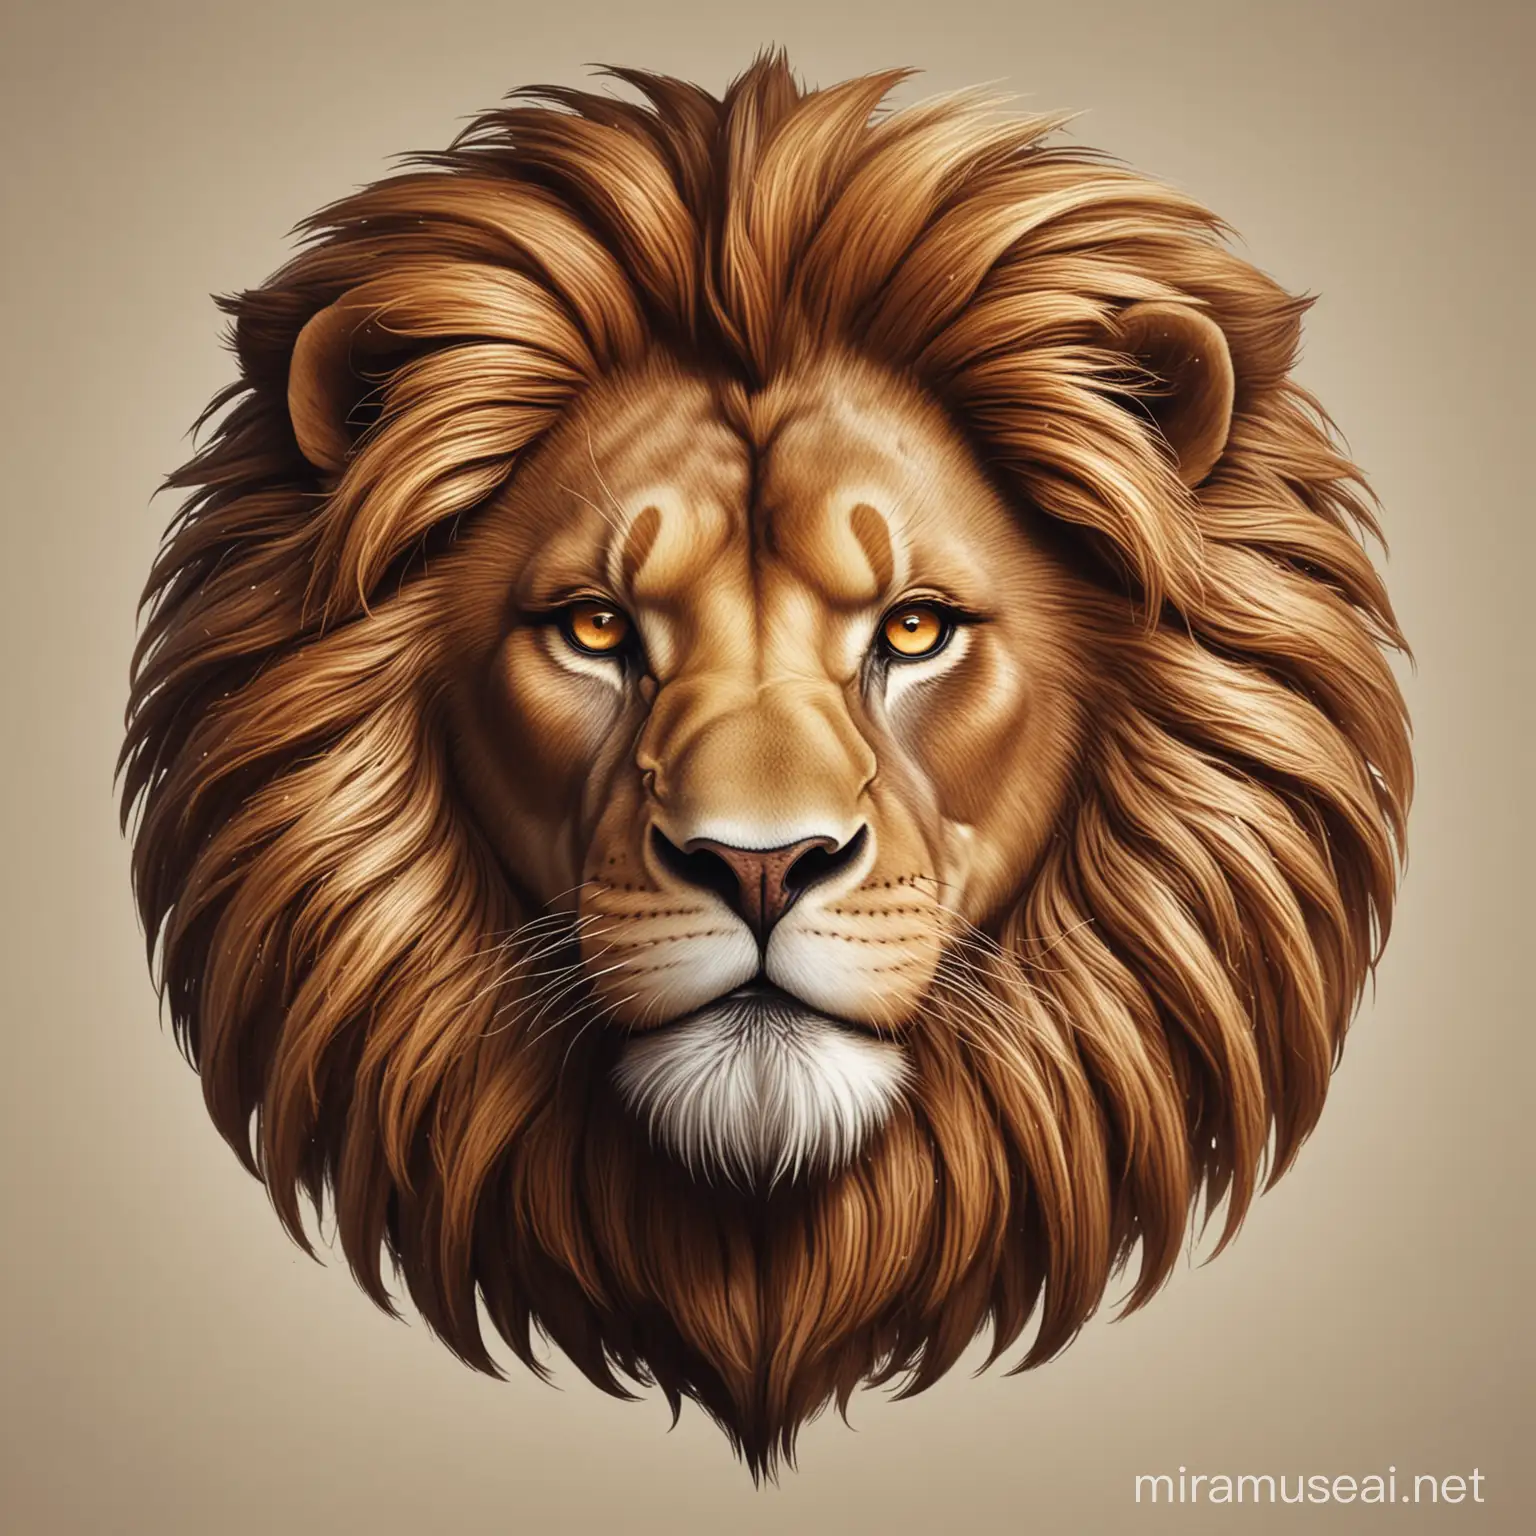 realistic lion logo, illustration powerful and majestic lion  face focusing on its regal eyes and mane. clean and modern look with a striking visual impact that captures the essence of royalty. Expression and Impact: Ensure the lion’s expression and stance convey awe and respect, embodying the group’s ethos of strength and principle.